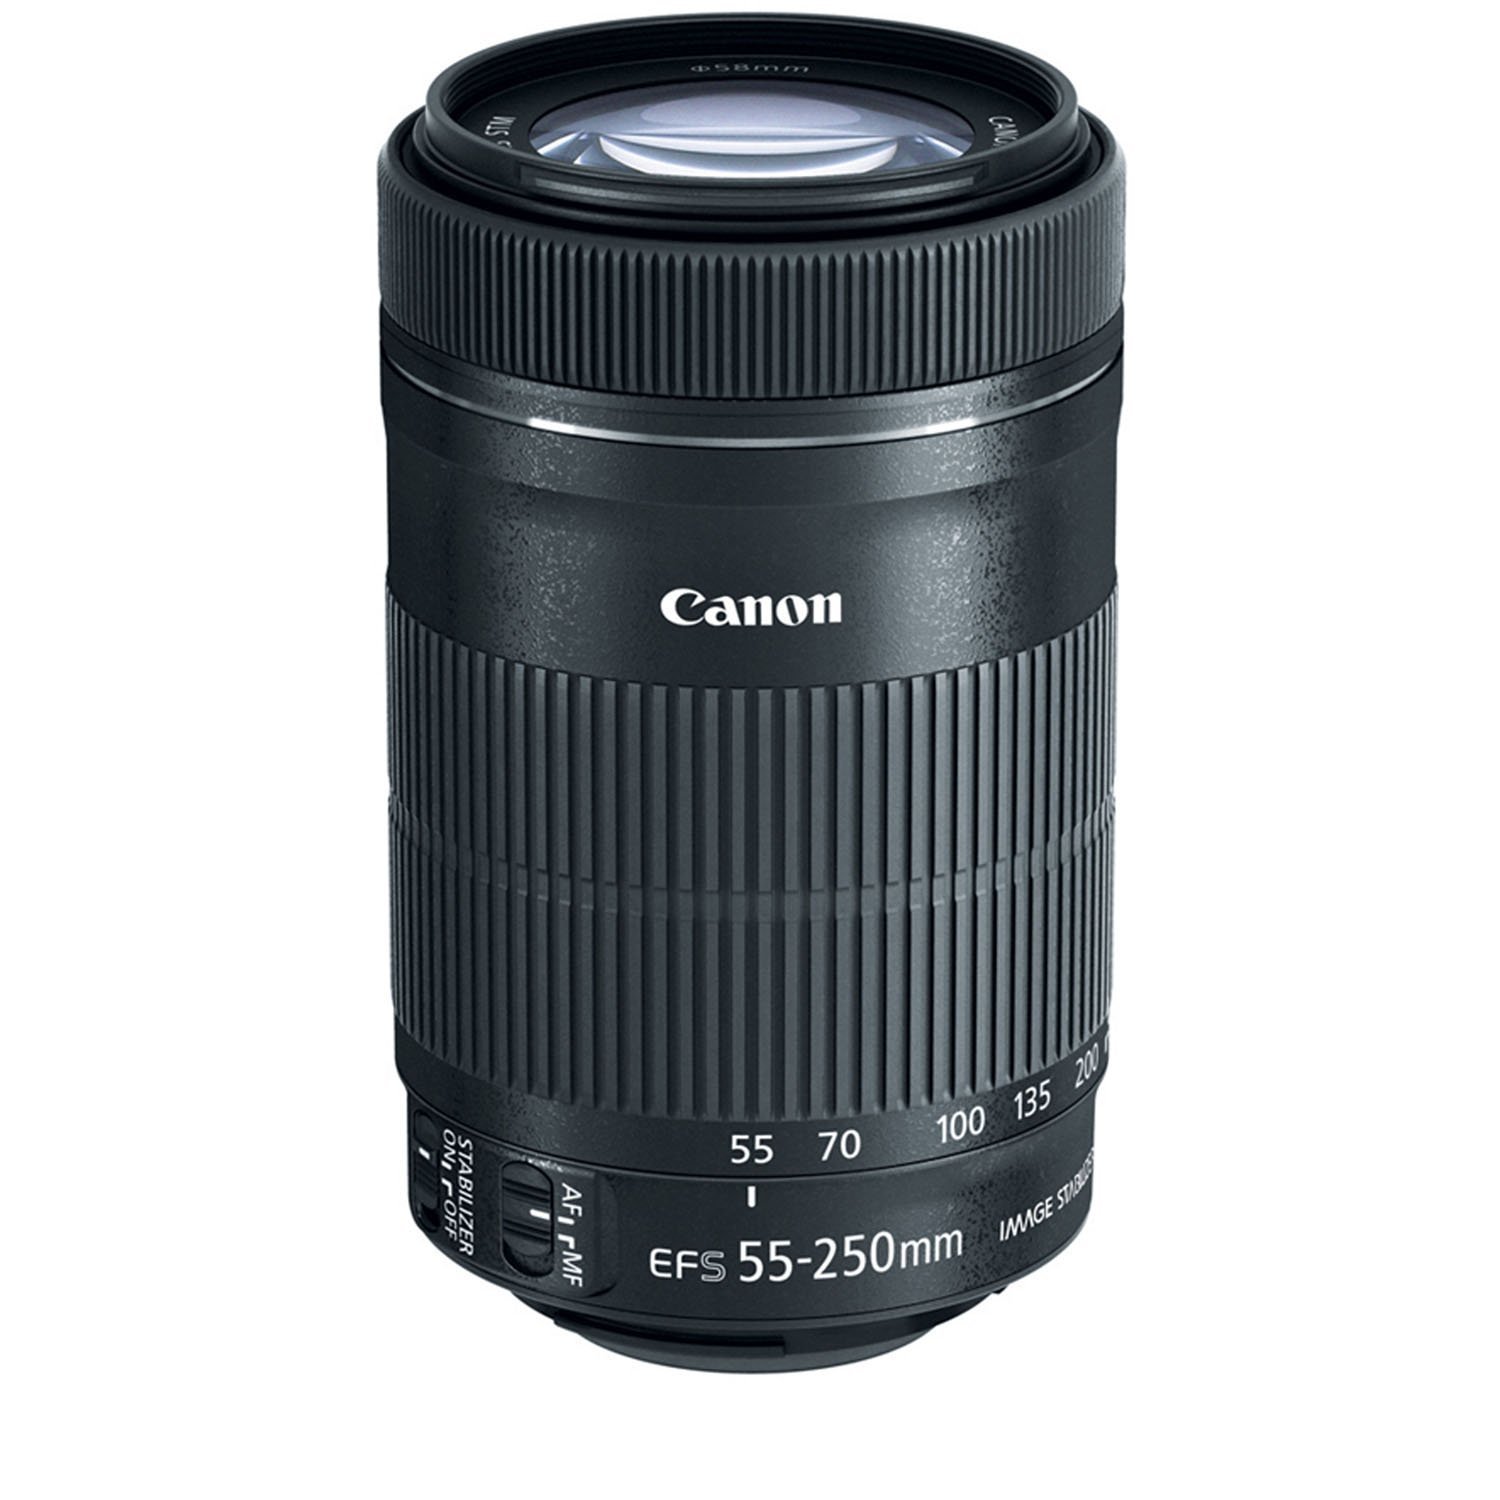 Recommended Lenses for Canon Cameras - davemclelland.com